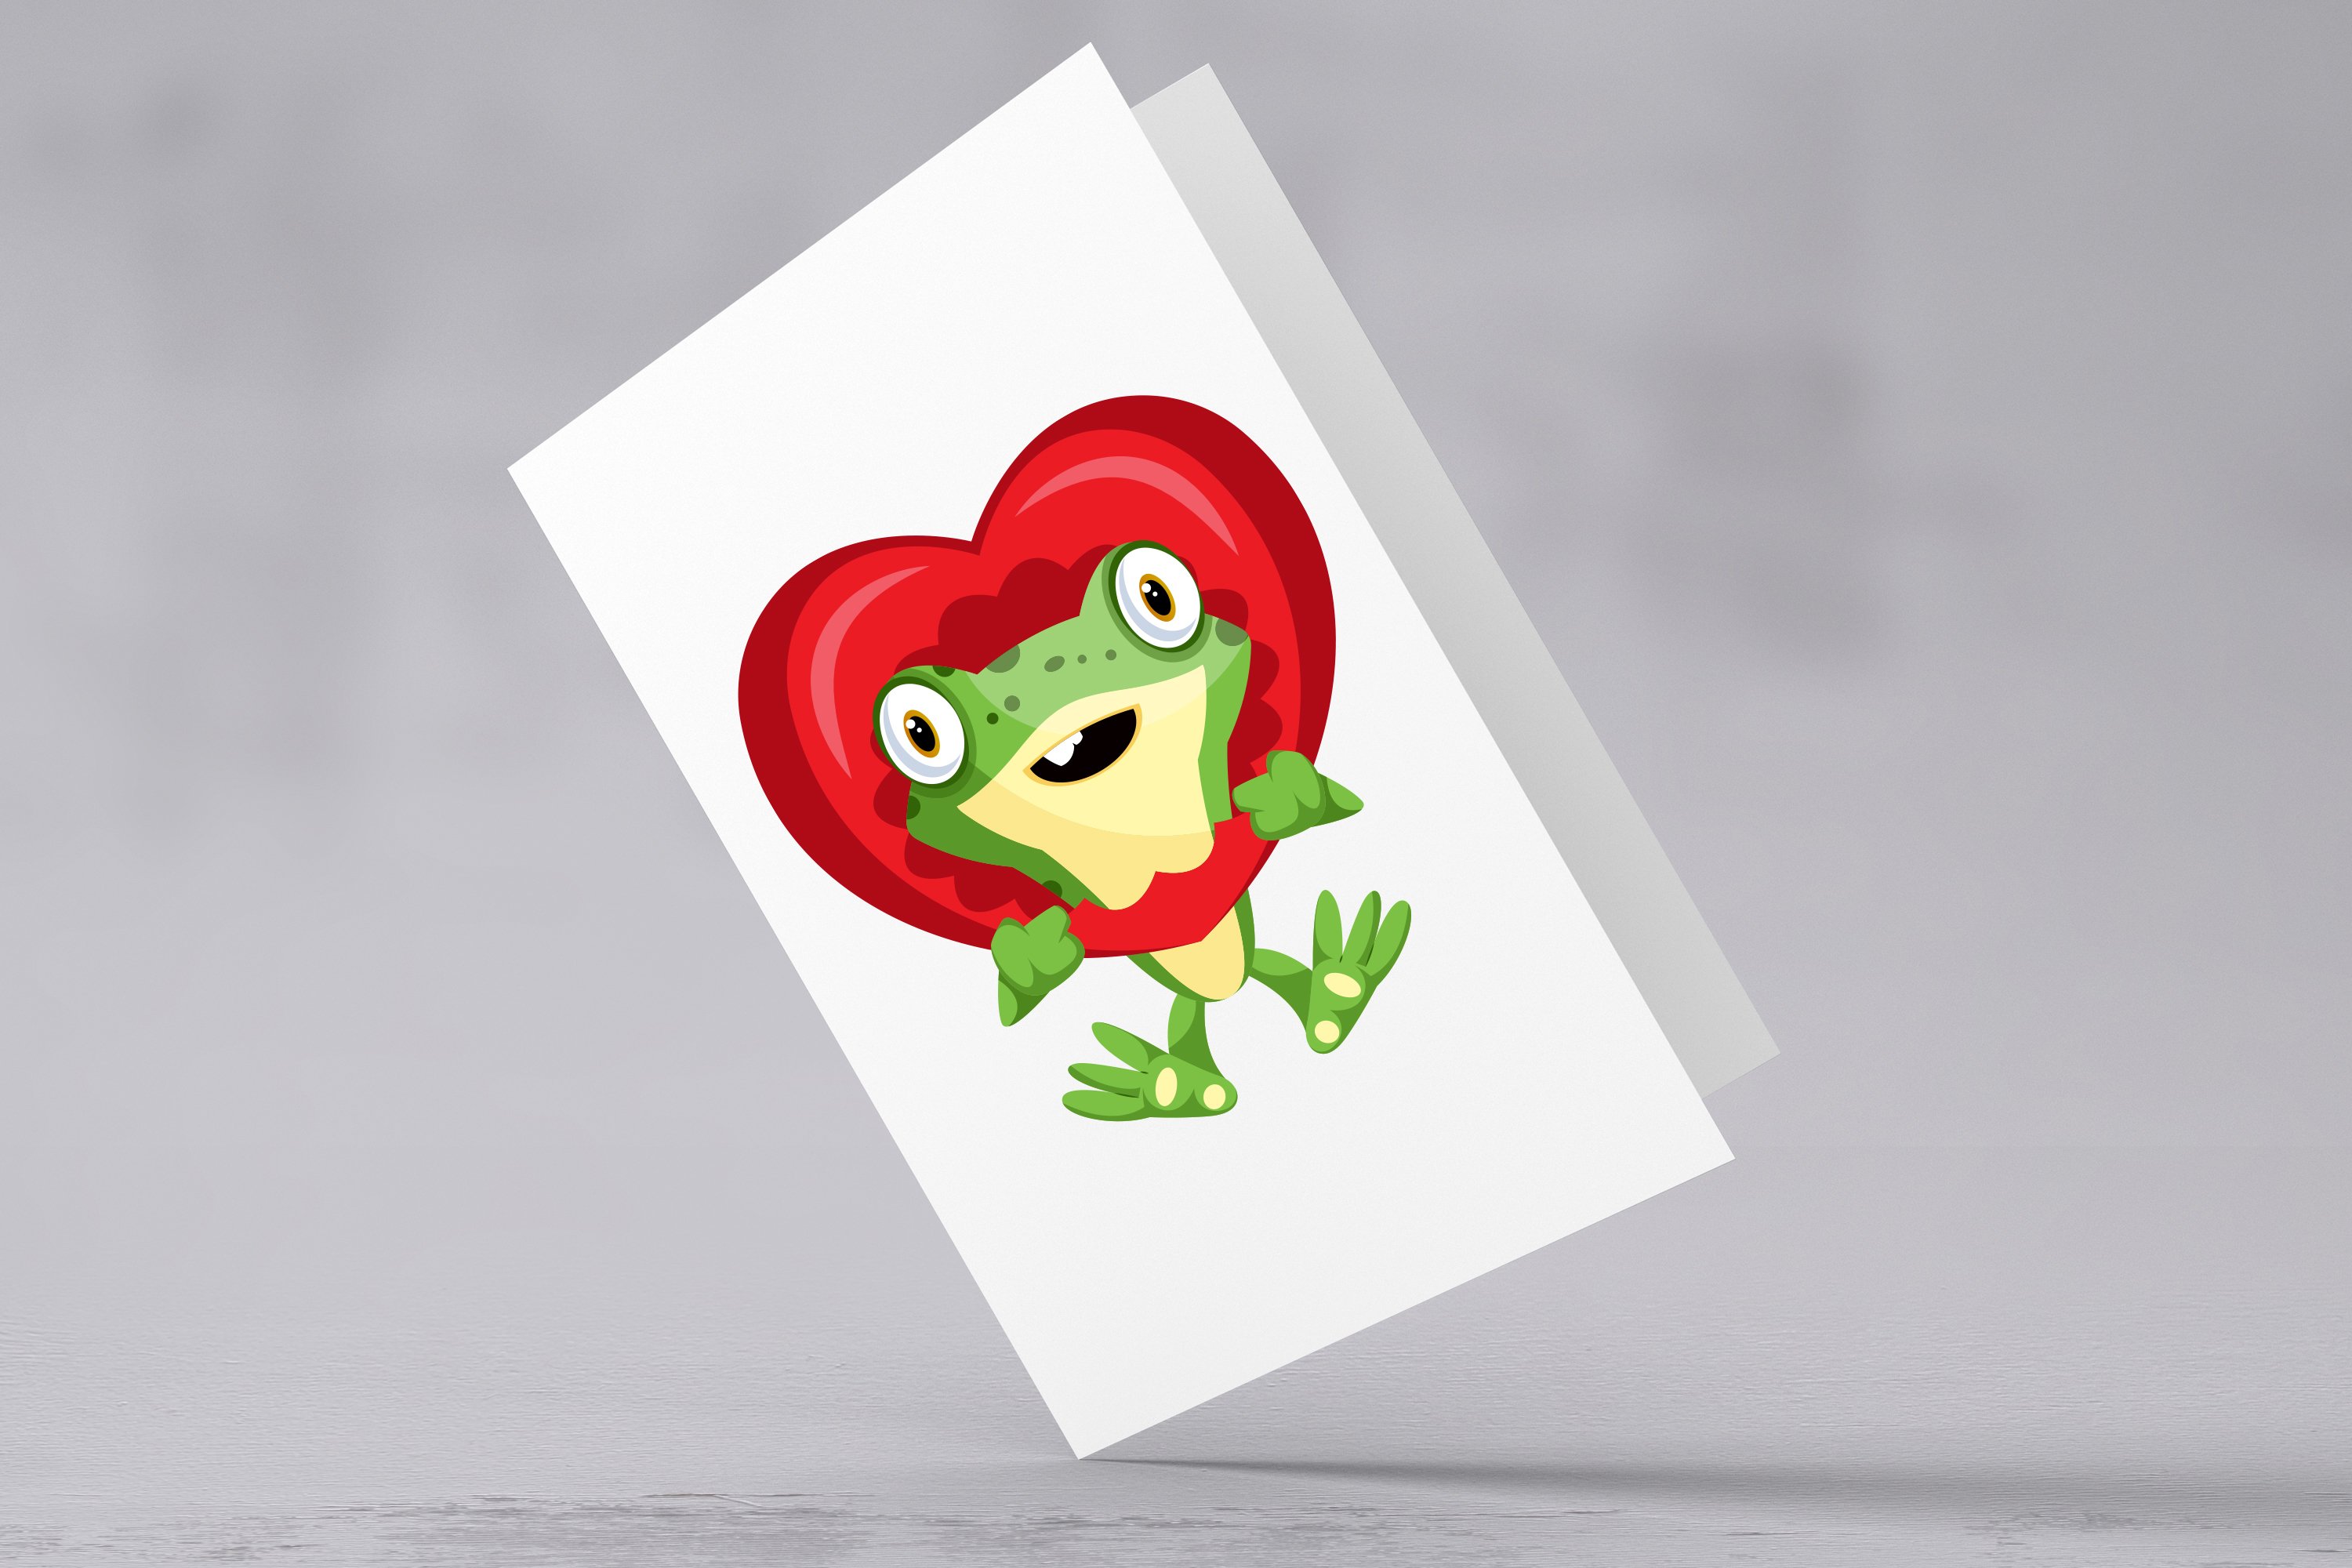 So lovely frog on the white greeting card.